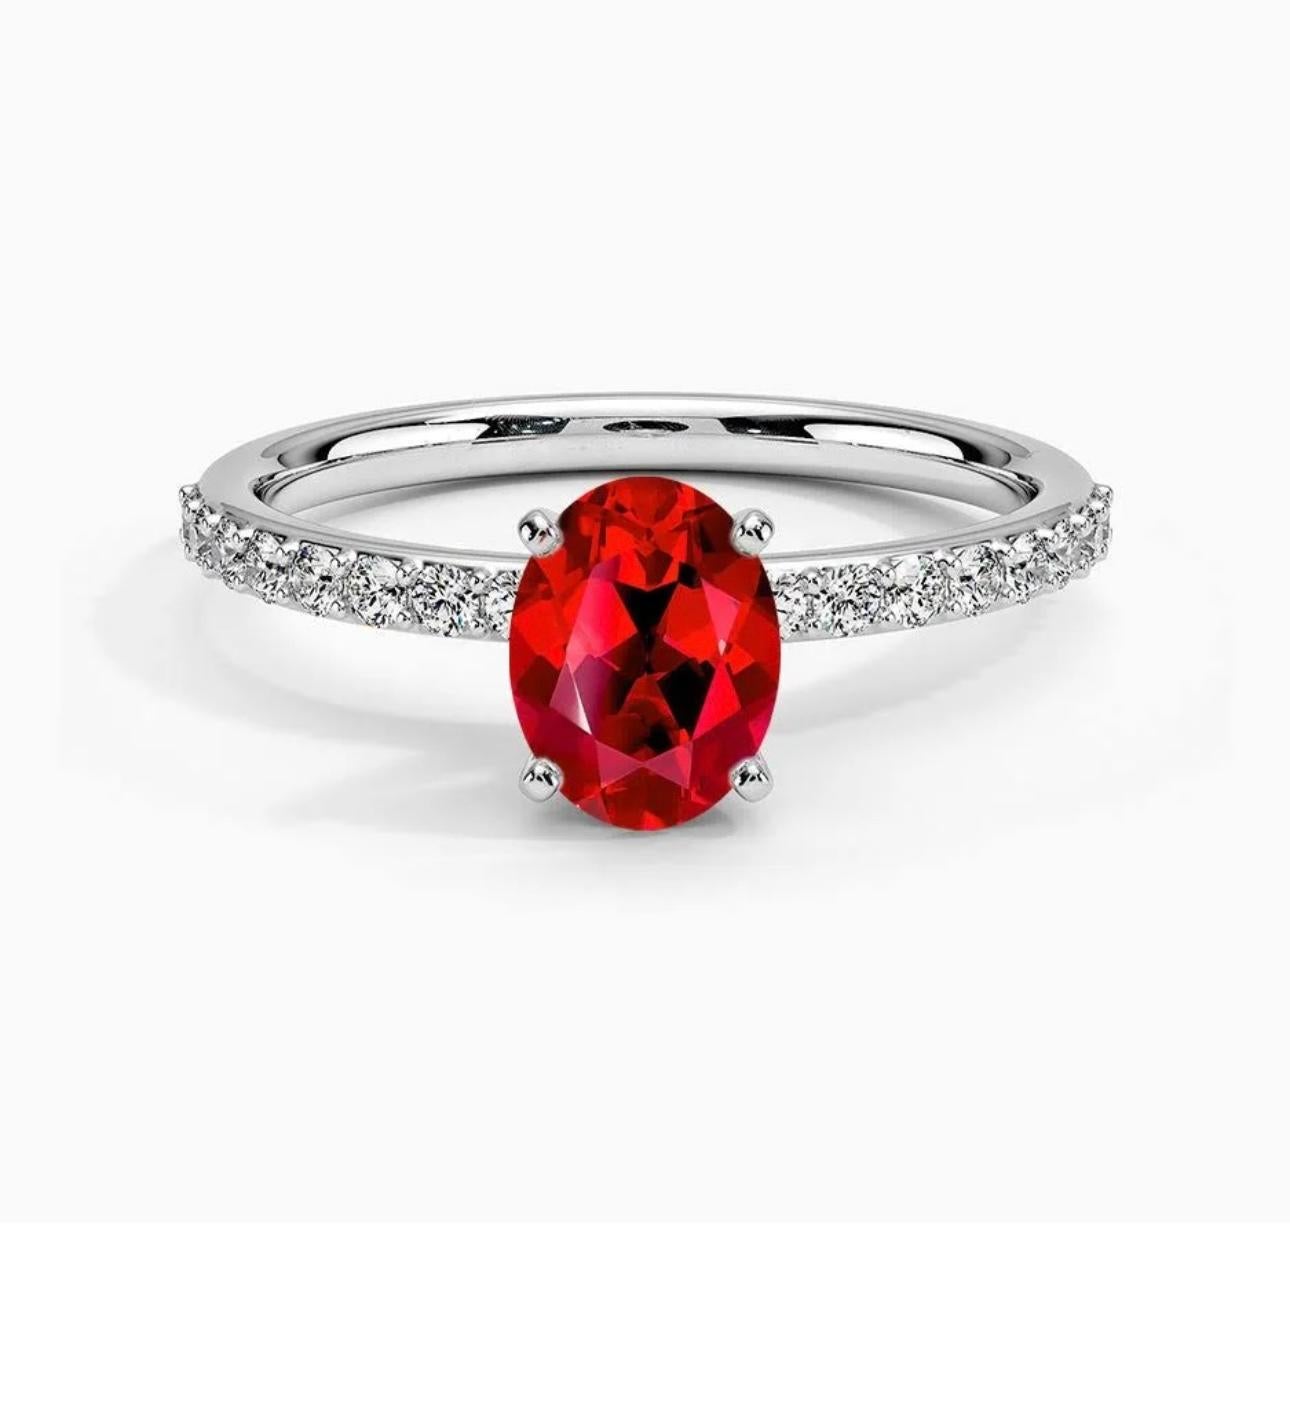  1.25 Ct Oval Cut Treated Ruby & 0.85 Ct Natural Pave Diamond Hidden Halo Engagement Ring with size 5.5 in 14 K white Gold
Introducing a truly stunning piece, behold the 1.25 Carat Oval Ruby & 0.85 ct Diamond Ring in exquisite 14 Karat White Gold.